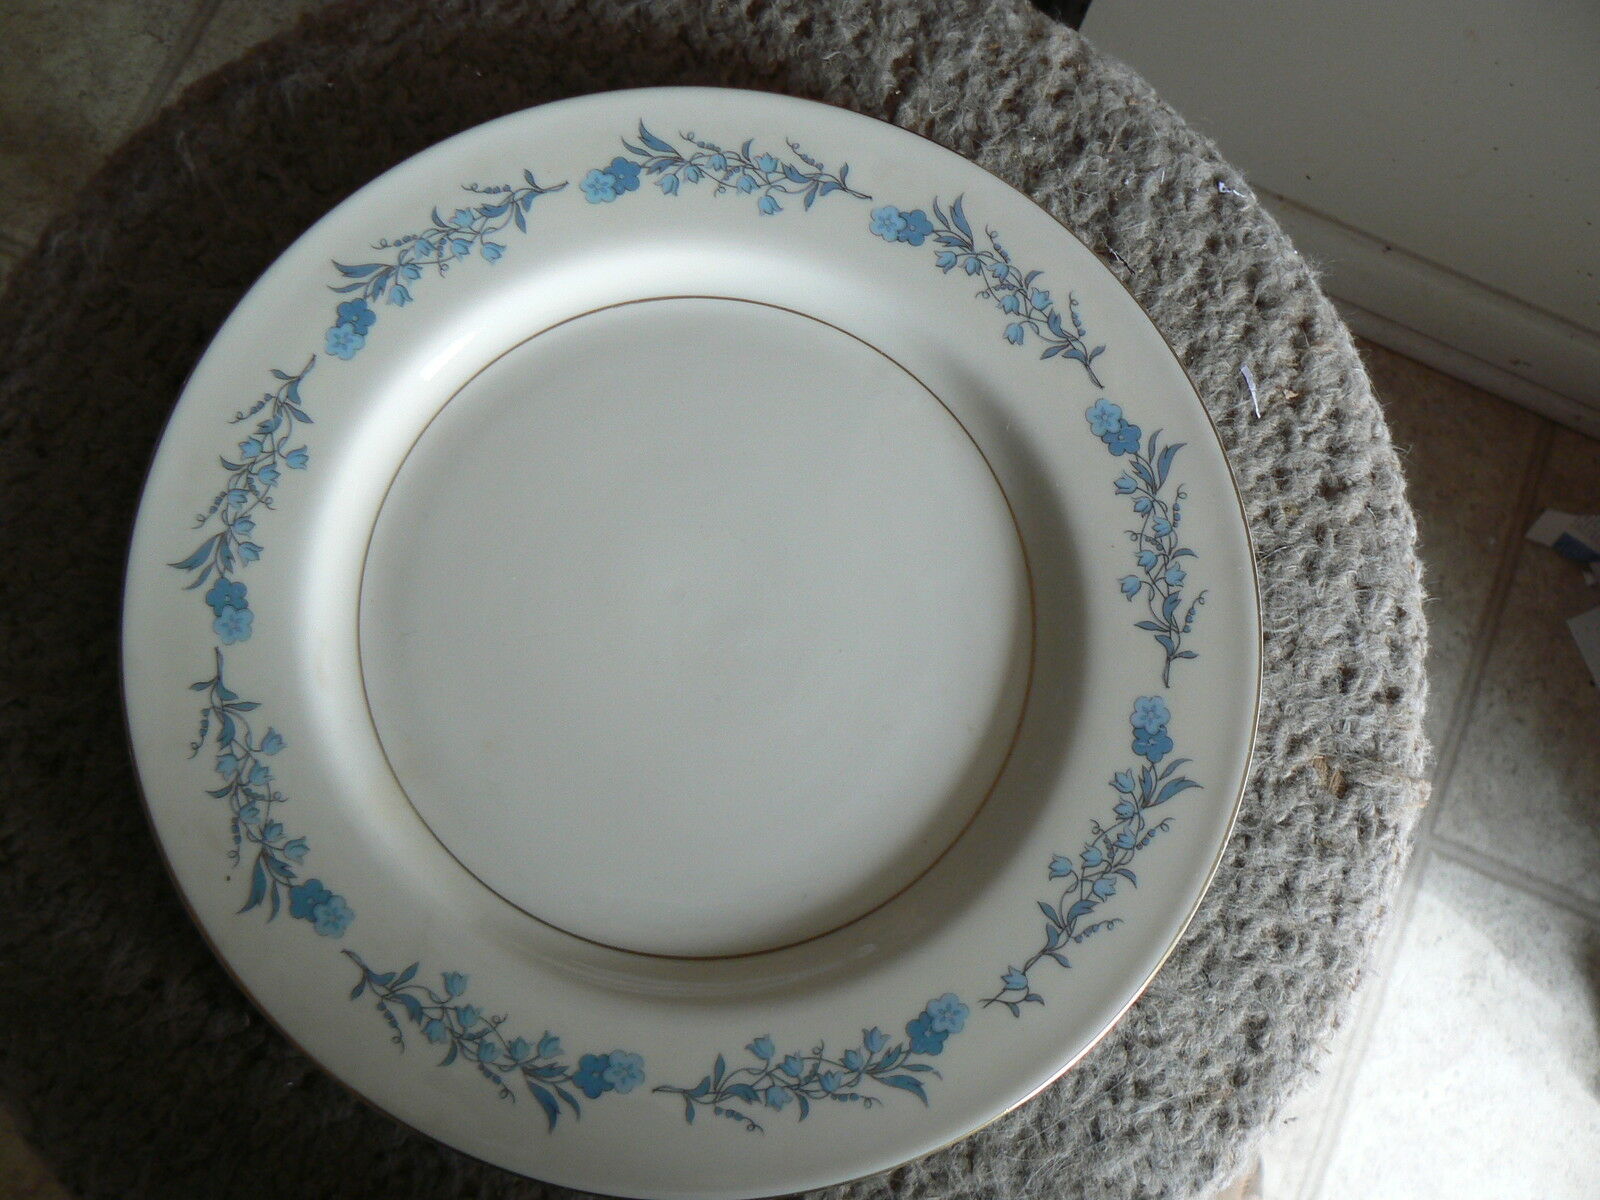 Theodore Haviland dinner plate (Clinton) 9 available - $4.31